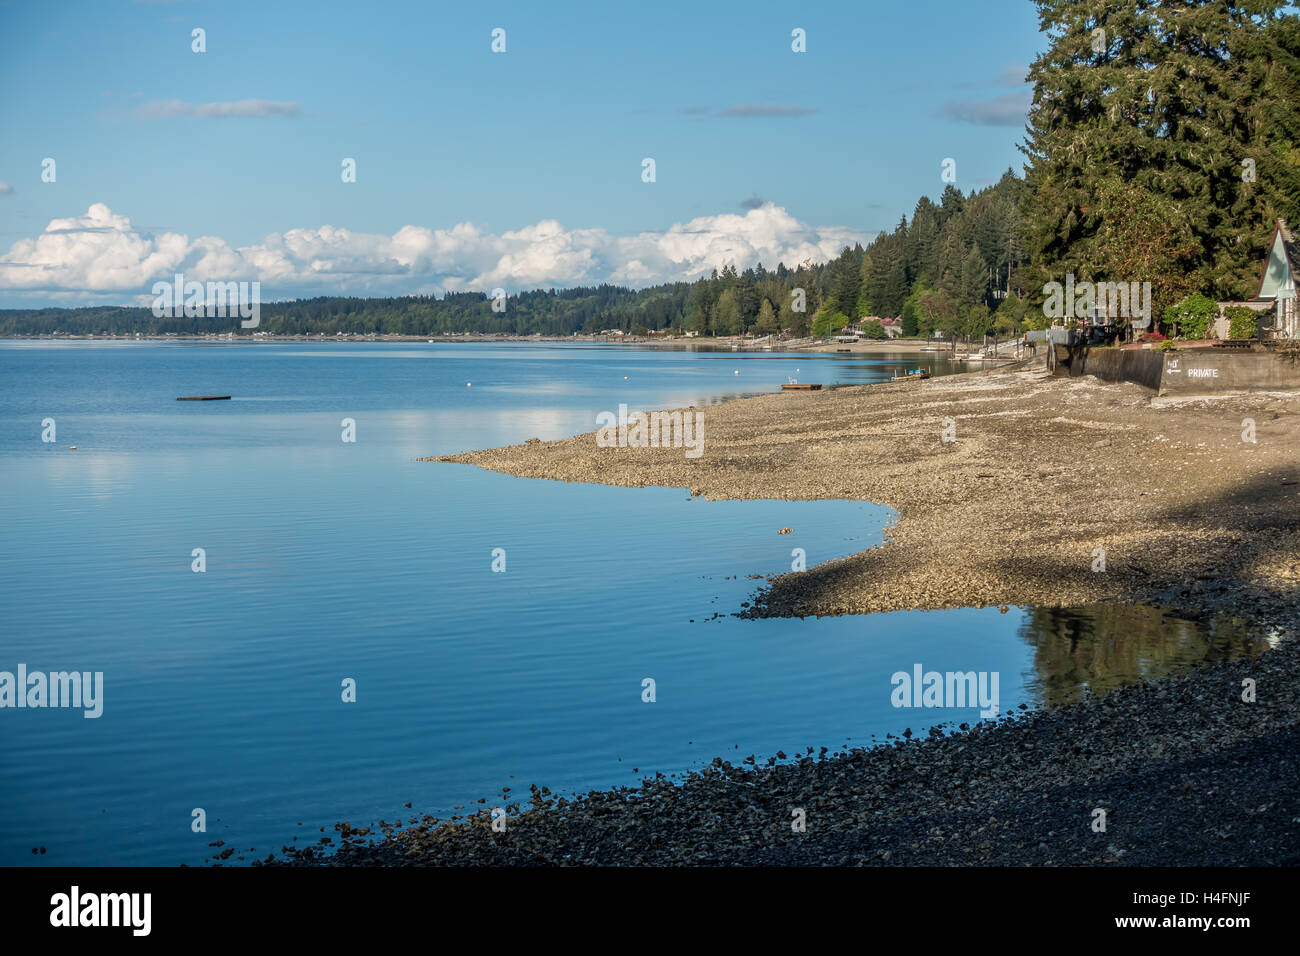 A panoramic view of homes along the coastline of Hood Canal in Washington State. The tide is low and the blue cloudy skies are r Stock Photo